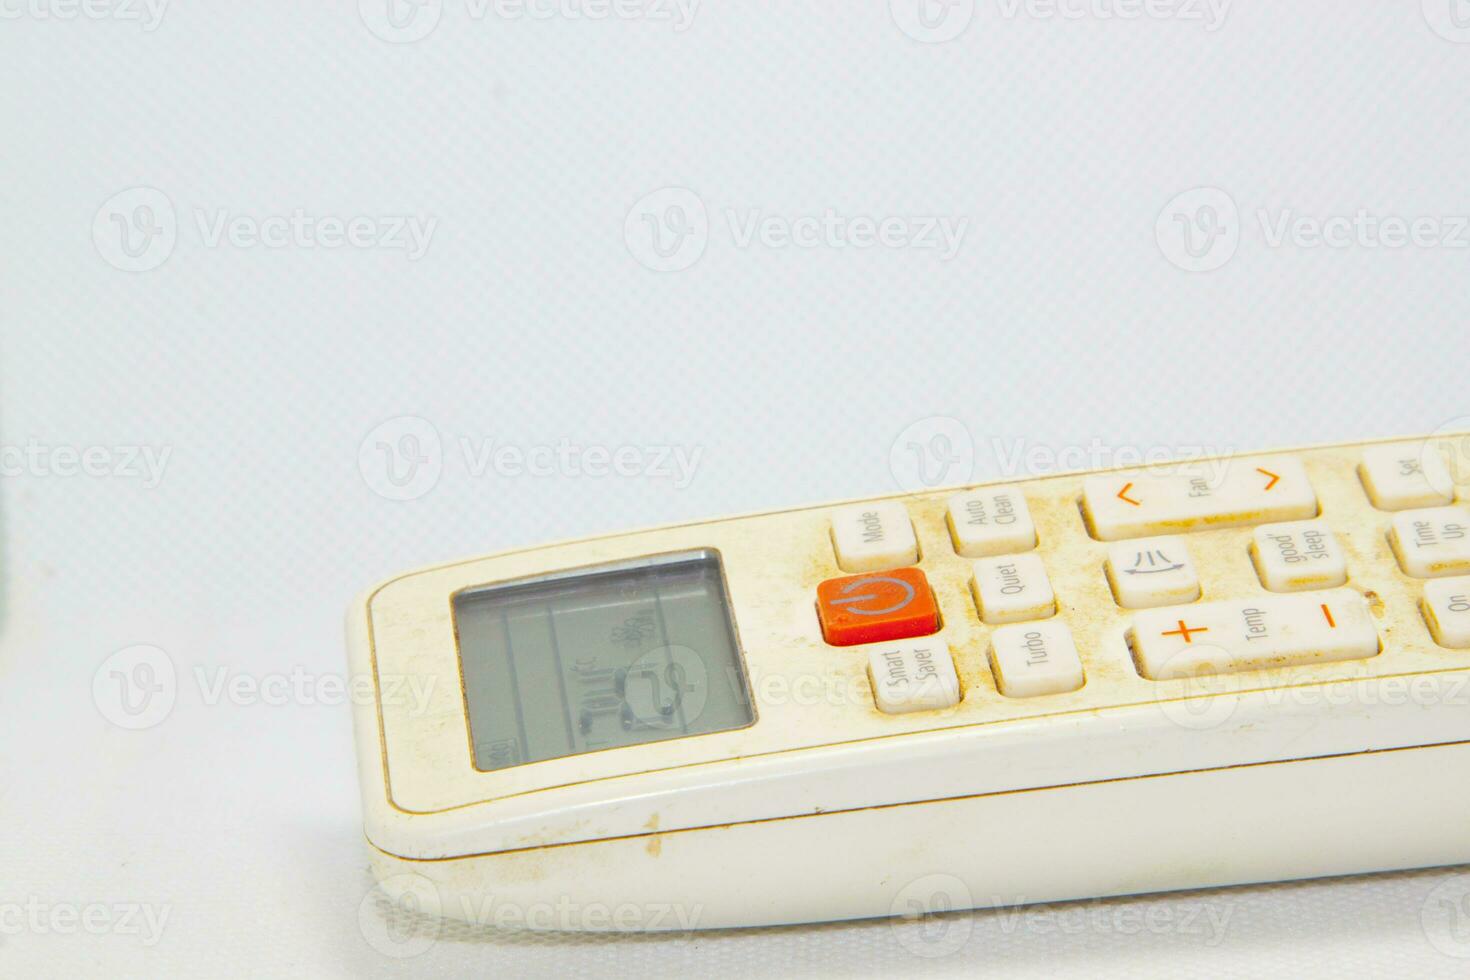 Air conditioner remote control for turning off and on the air conditioner - dirty, dusty. and old can be used normally and control the cold temperature - on a white background photo